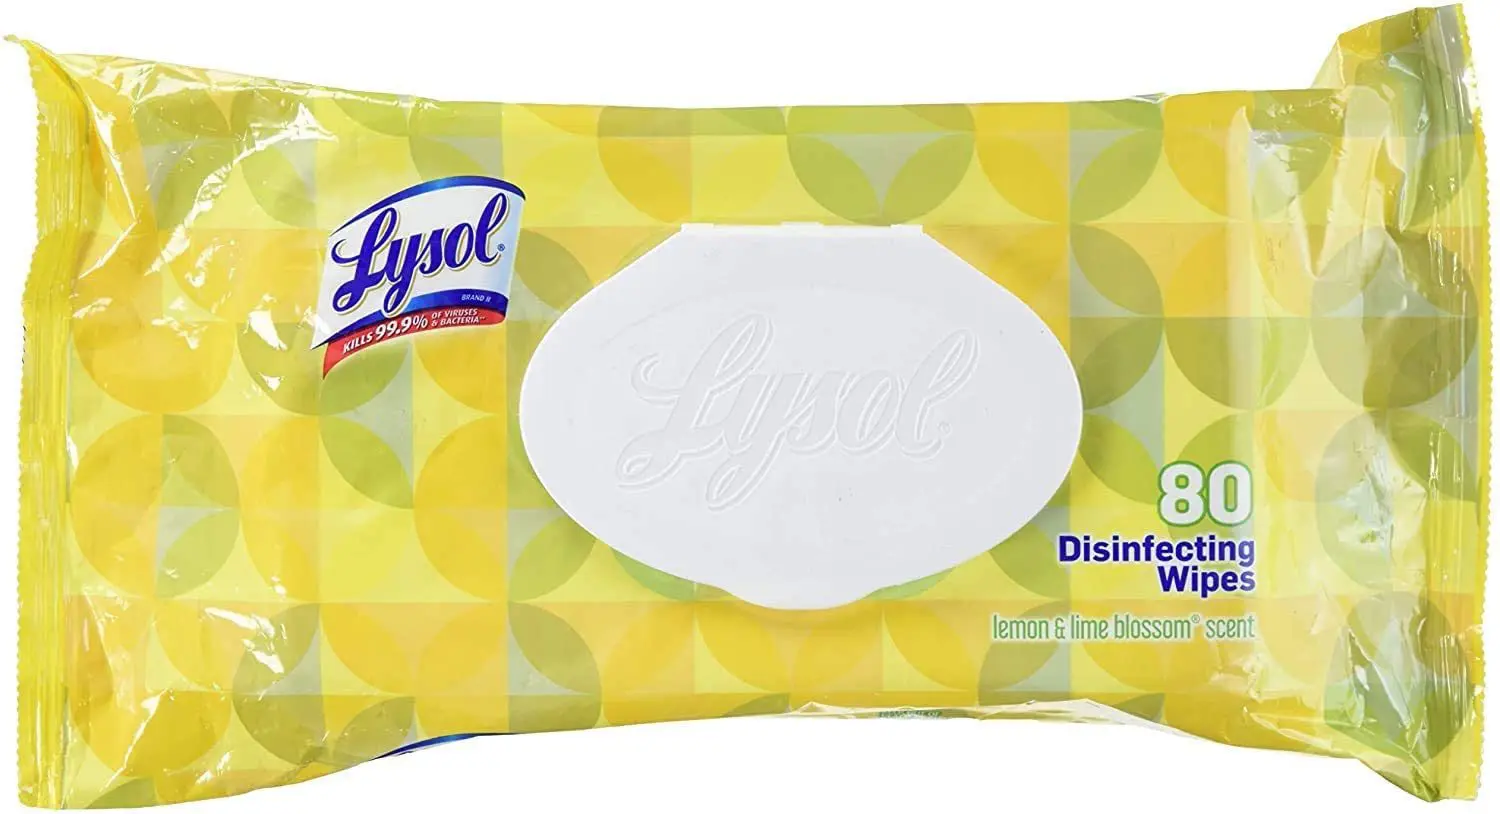 A package of lysol wipes on top of a yellow background.